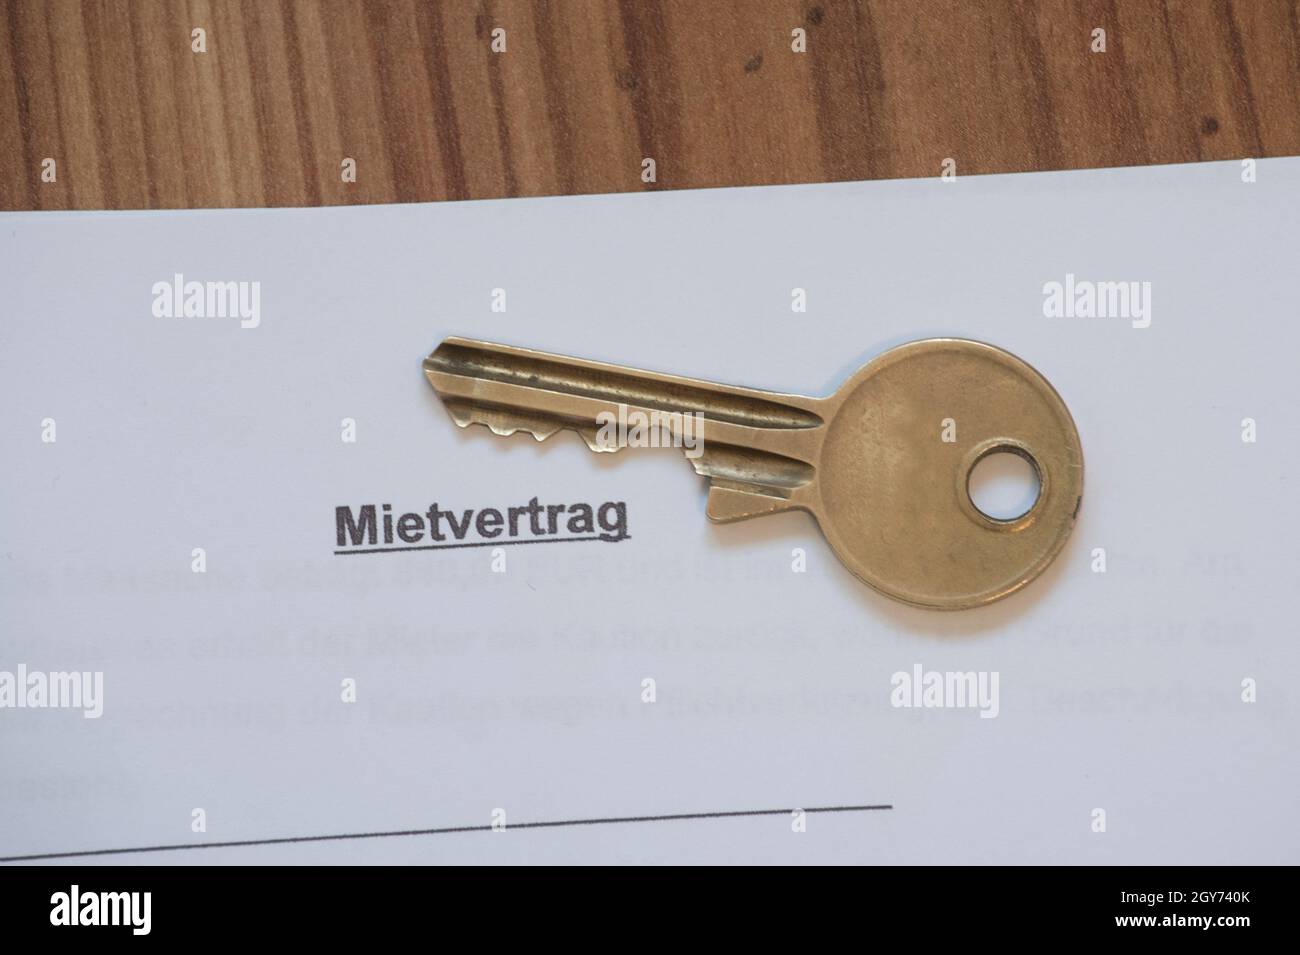 key and lease or rental agreement in german (Mietvertrag) when renting Stock Photo